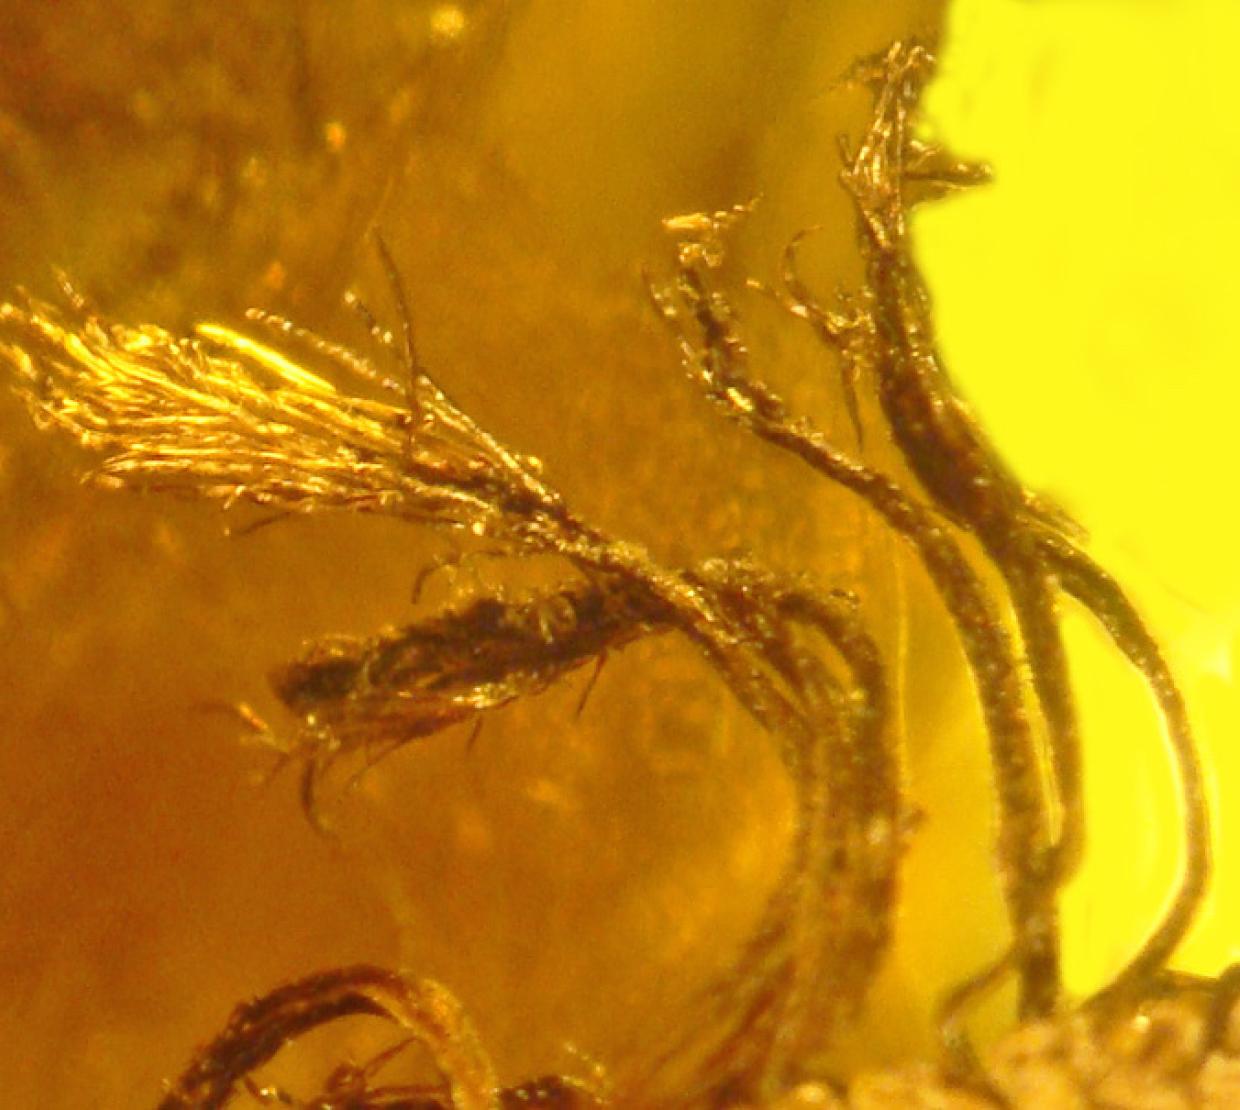 Extreme close-up of needles on the tip of the stem of an embryo plant encased in bright yellow amber resin.